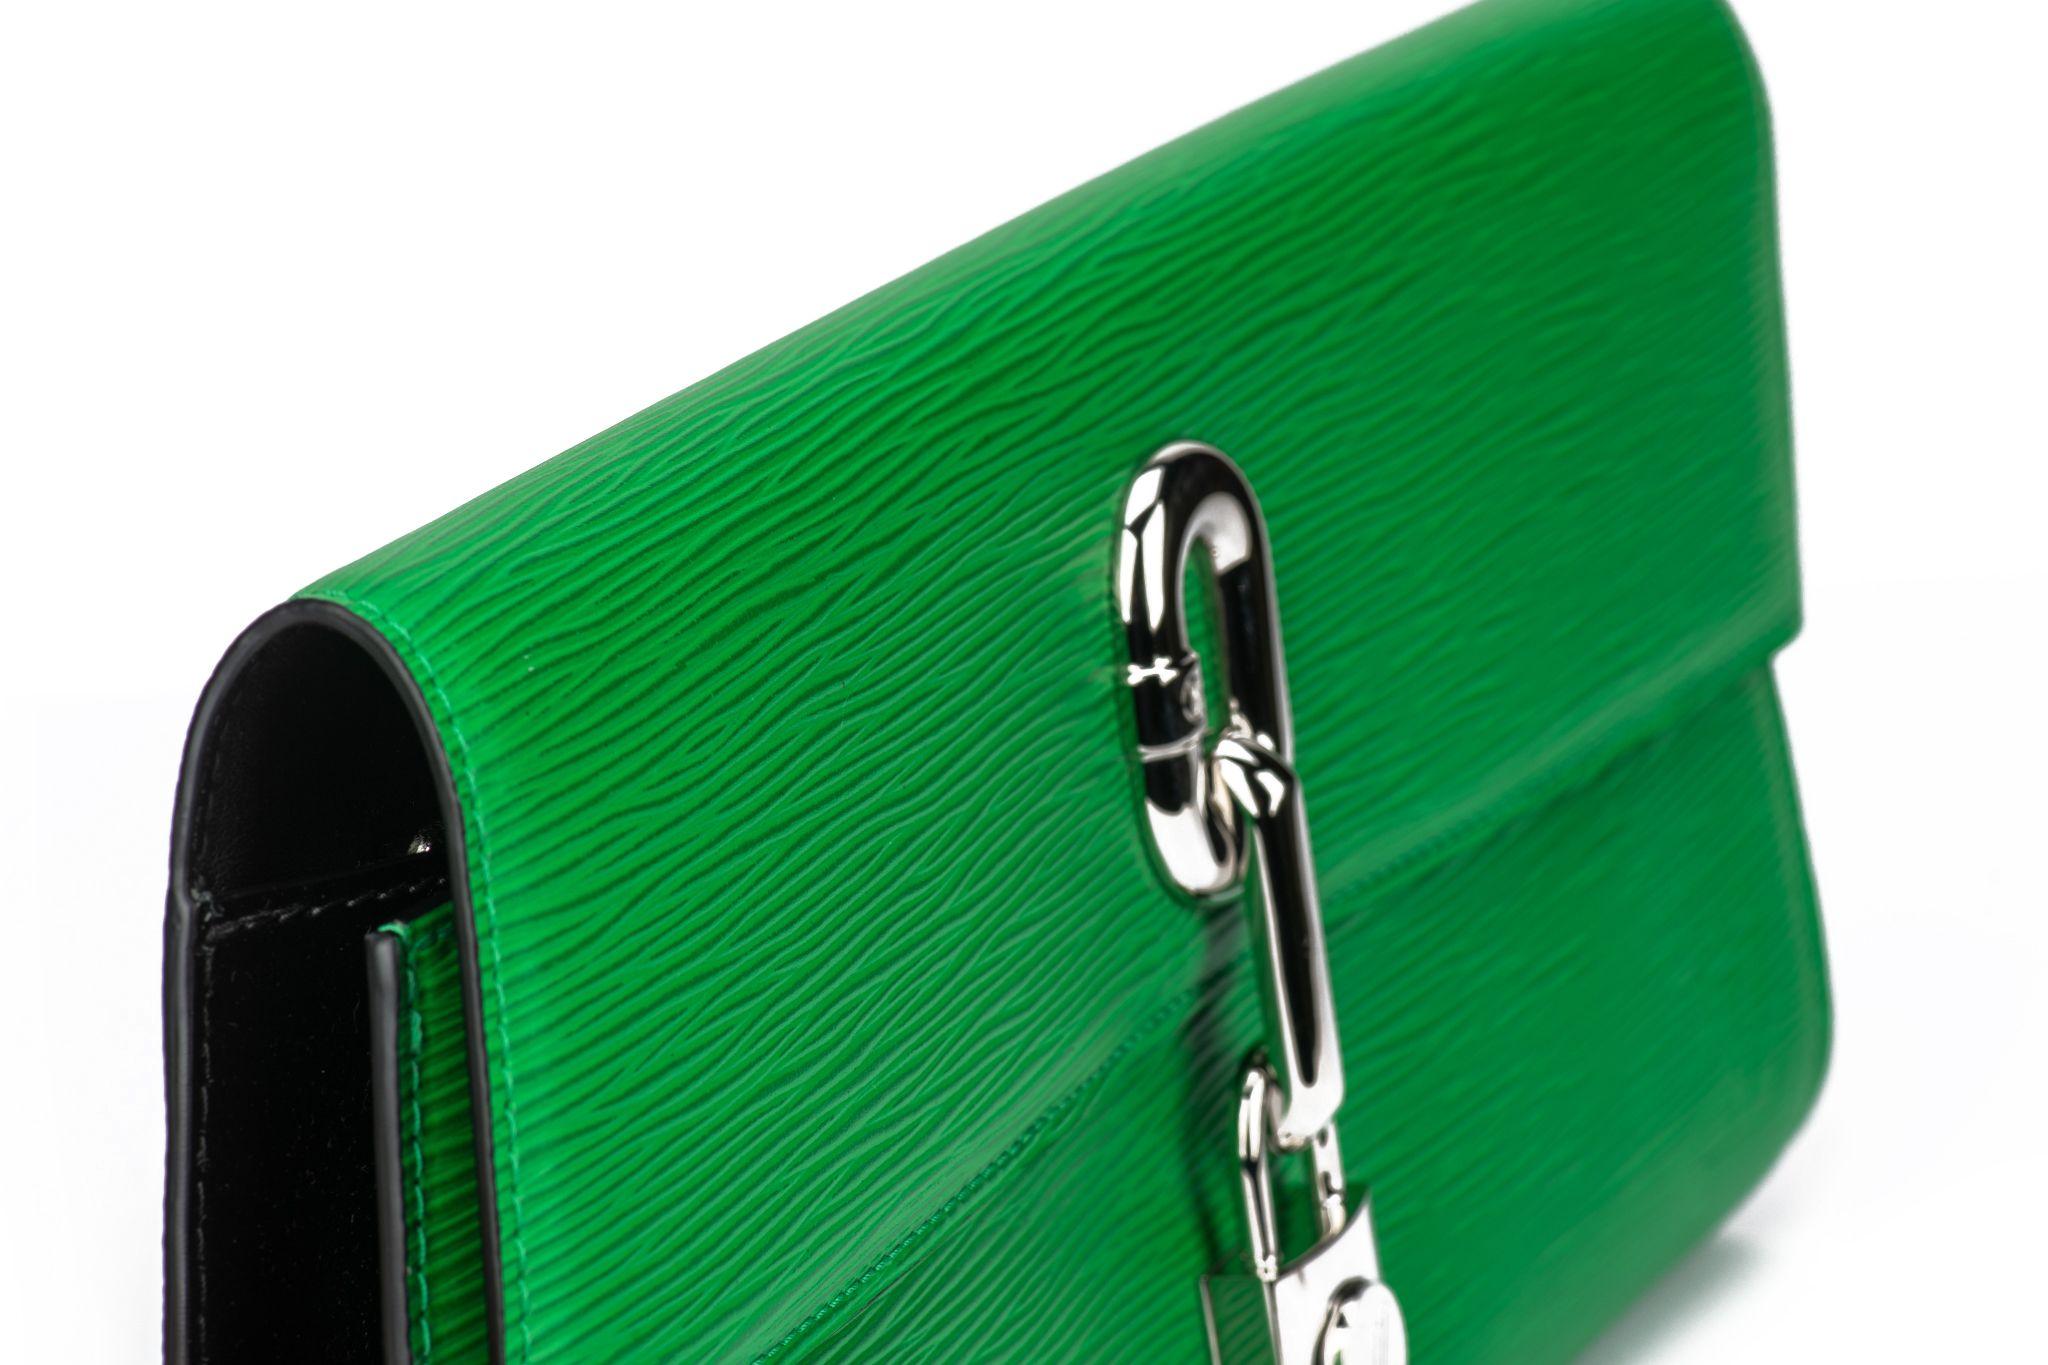 Louis Vuitton Blade clutch made of epi leather in a bright green. Palladium logo hardware. The clutch is new and comes with original dustcover.